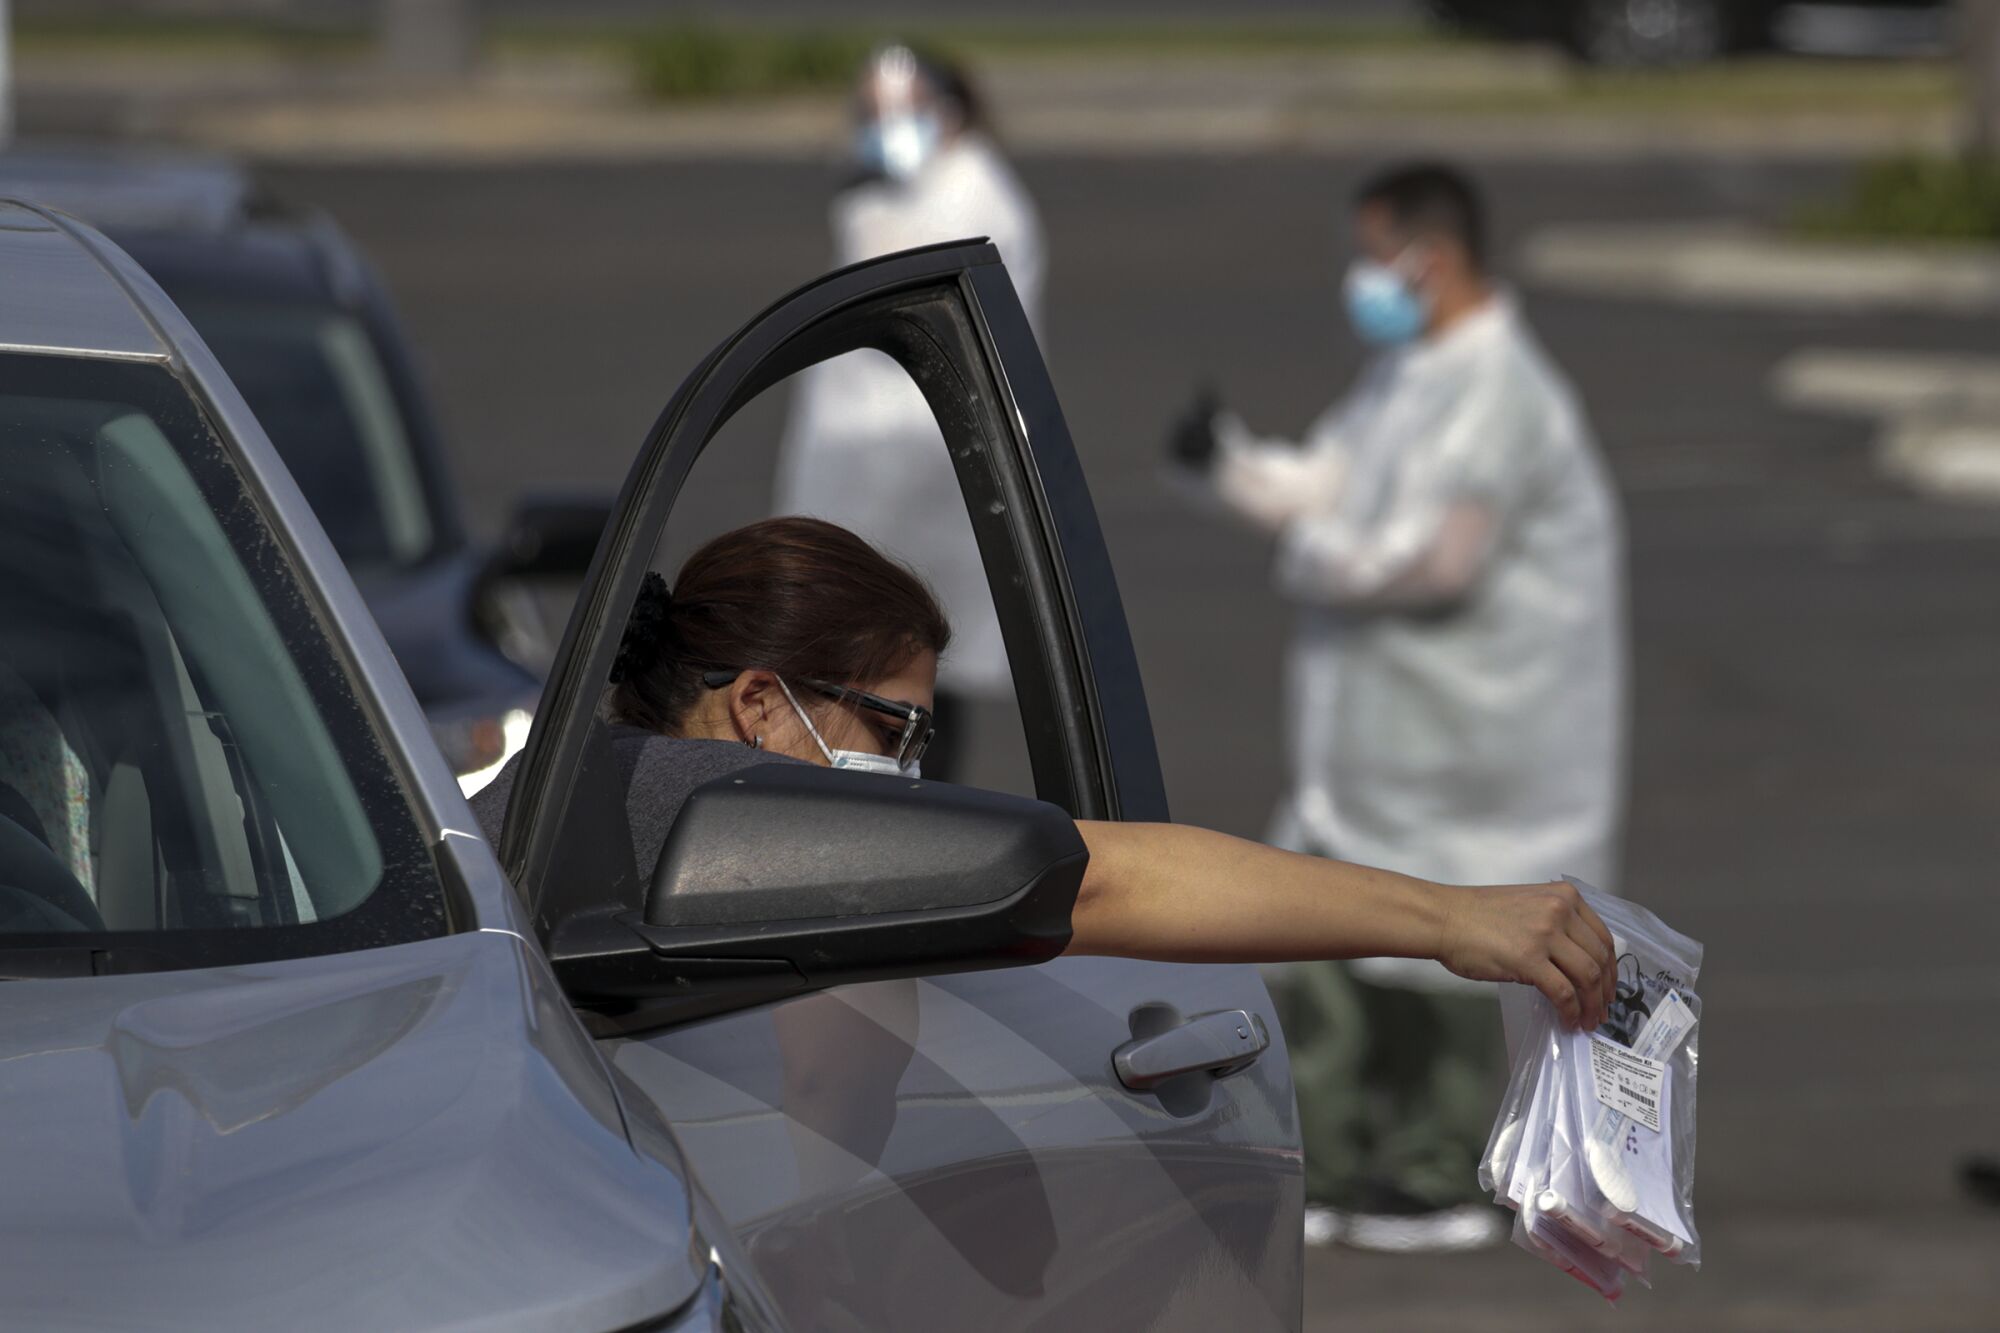 A motorist leans out the window of her open car door to deposit several plastic bags with test swabs.